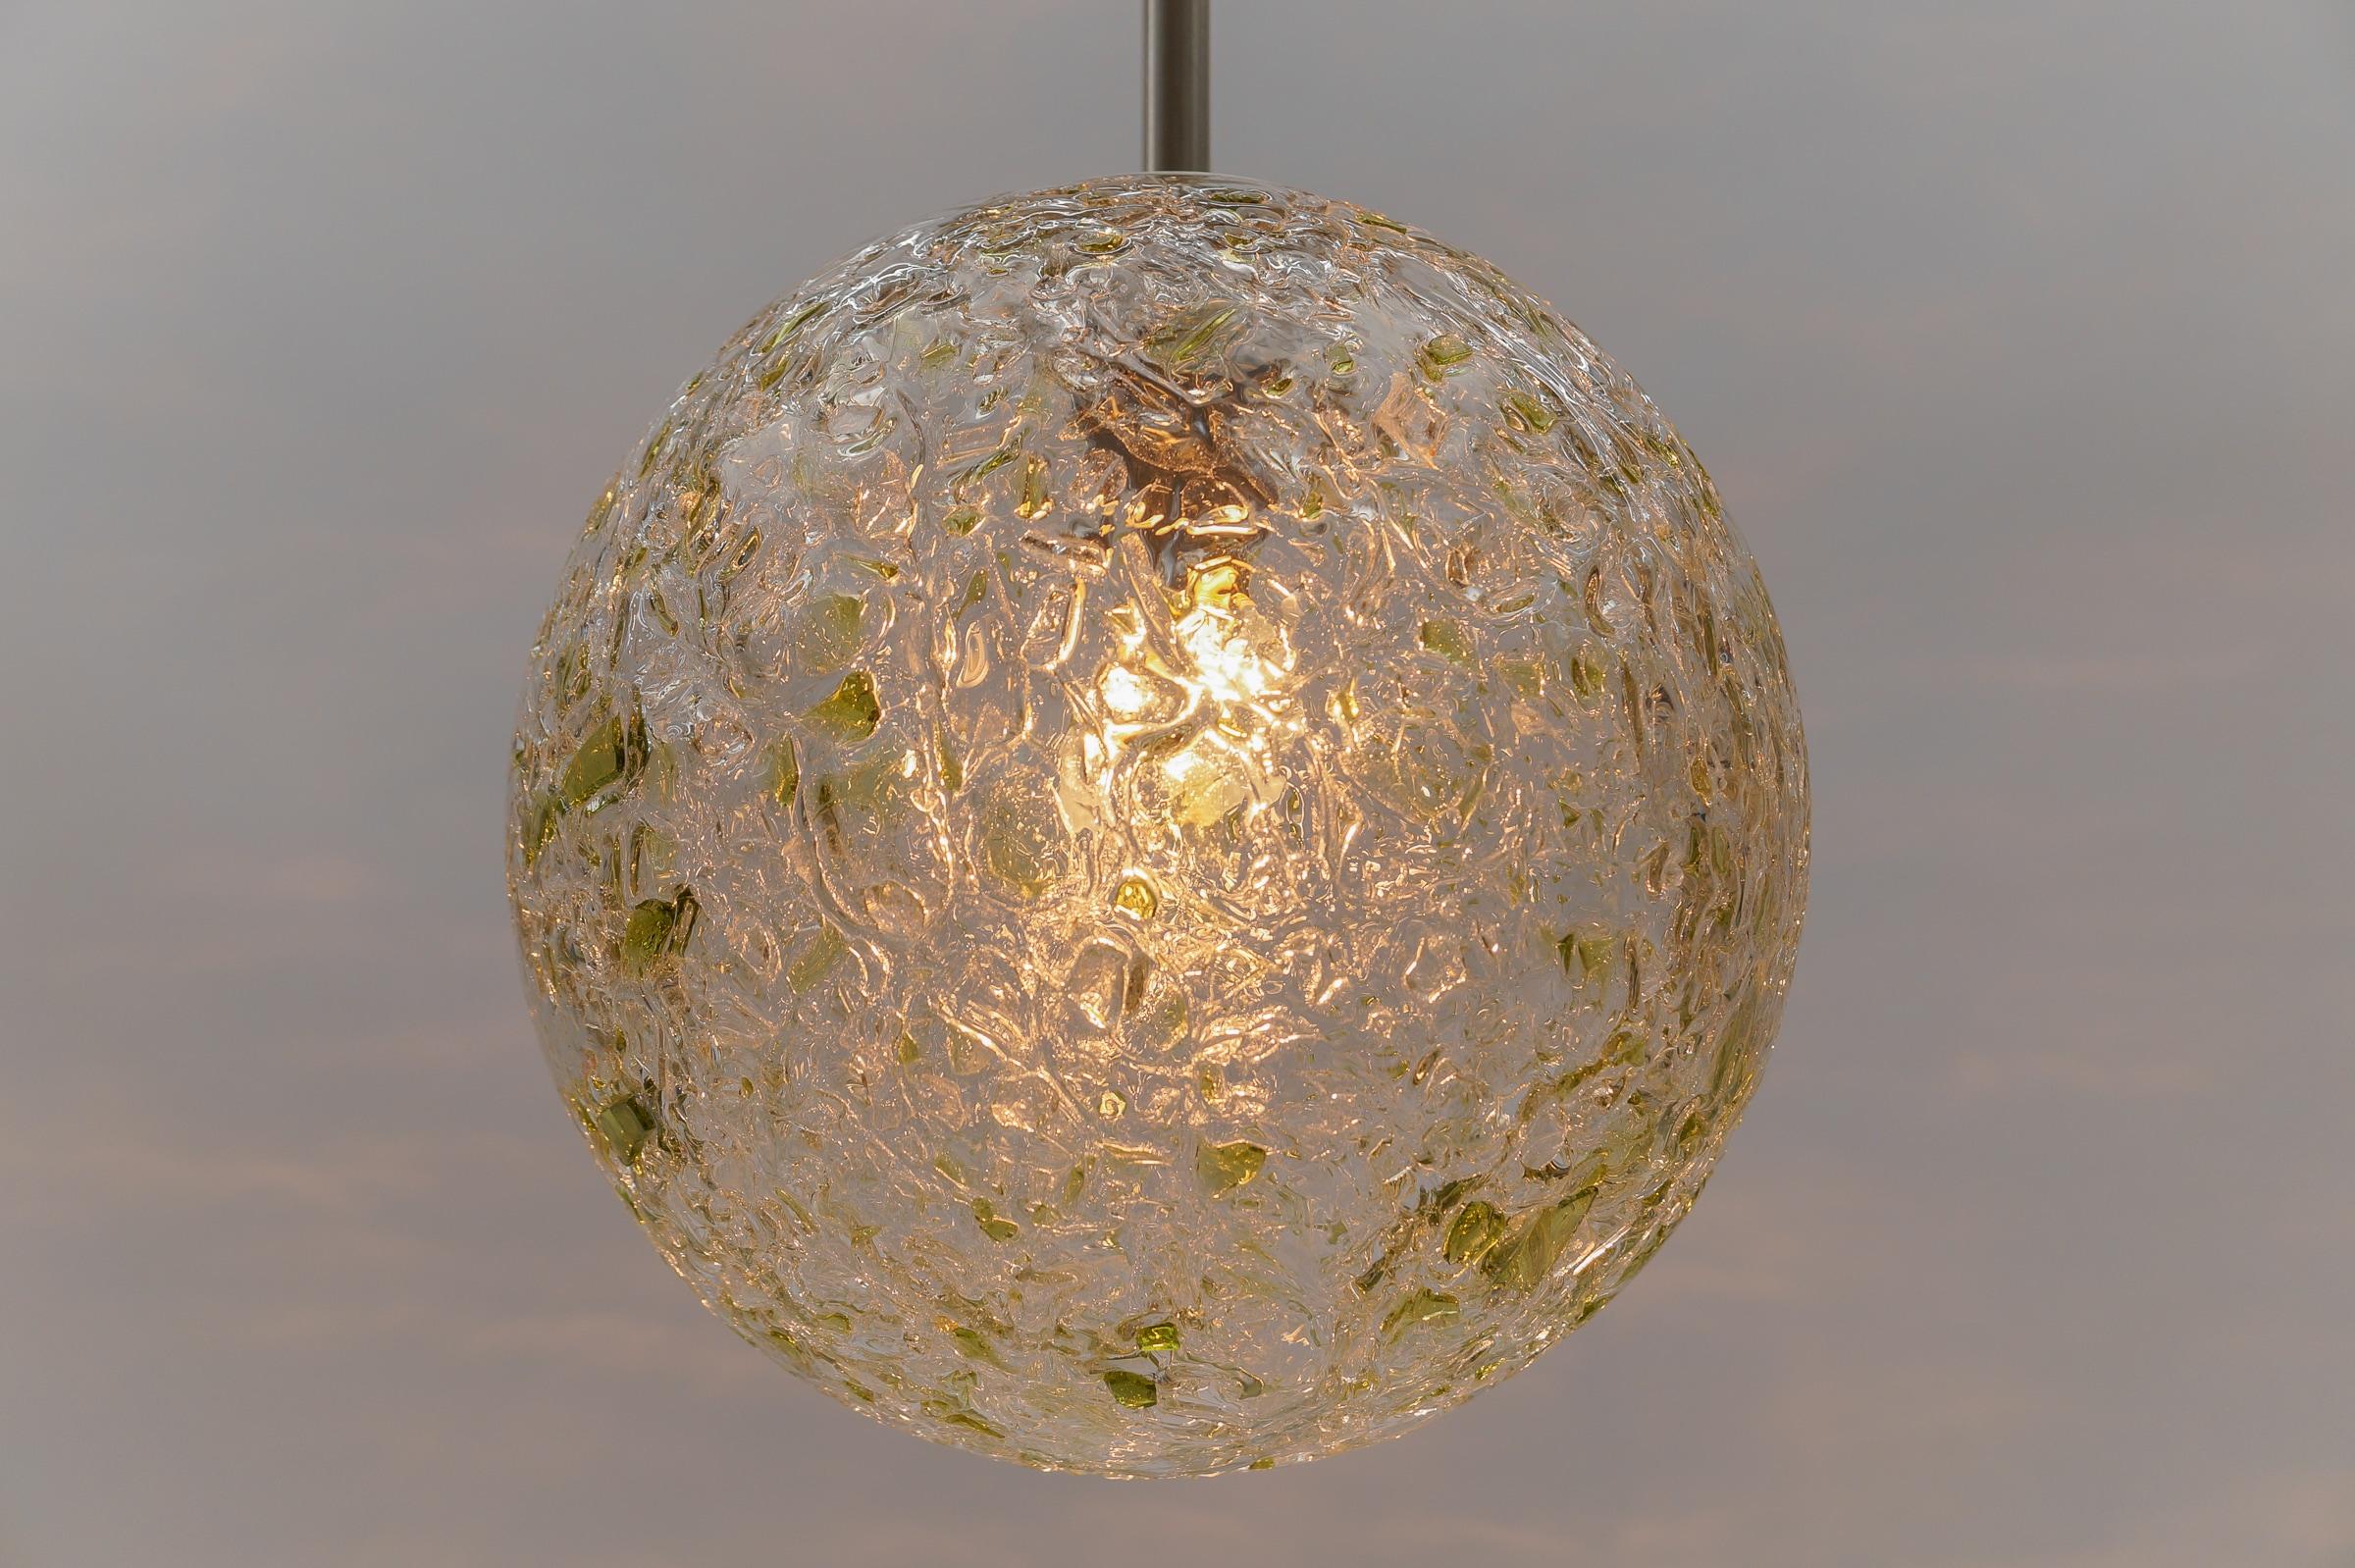 Green Massive Glass Ball Pendant Lamp by Doria, 1960s Germany For Sale 3